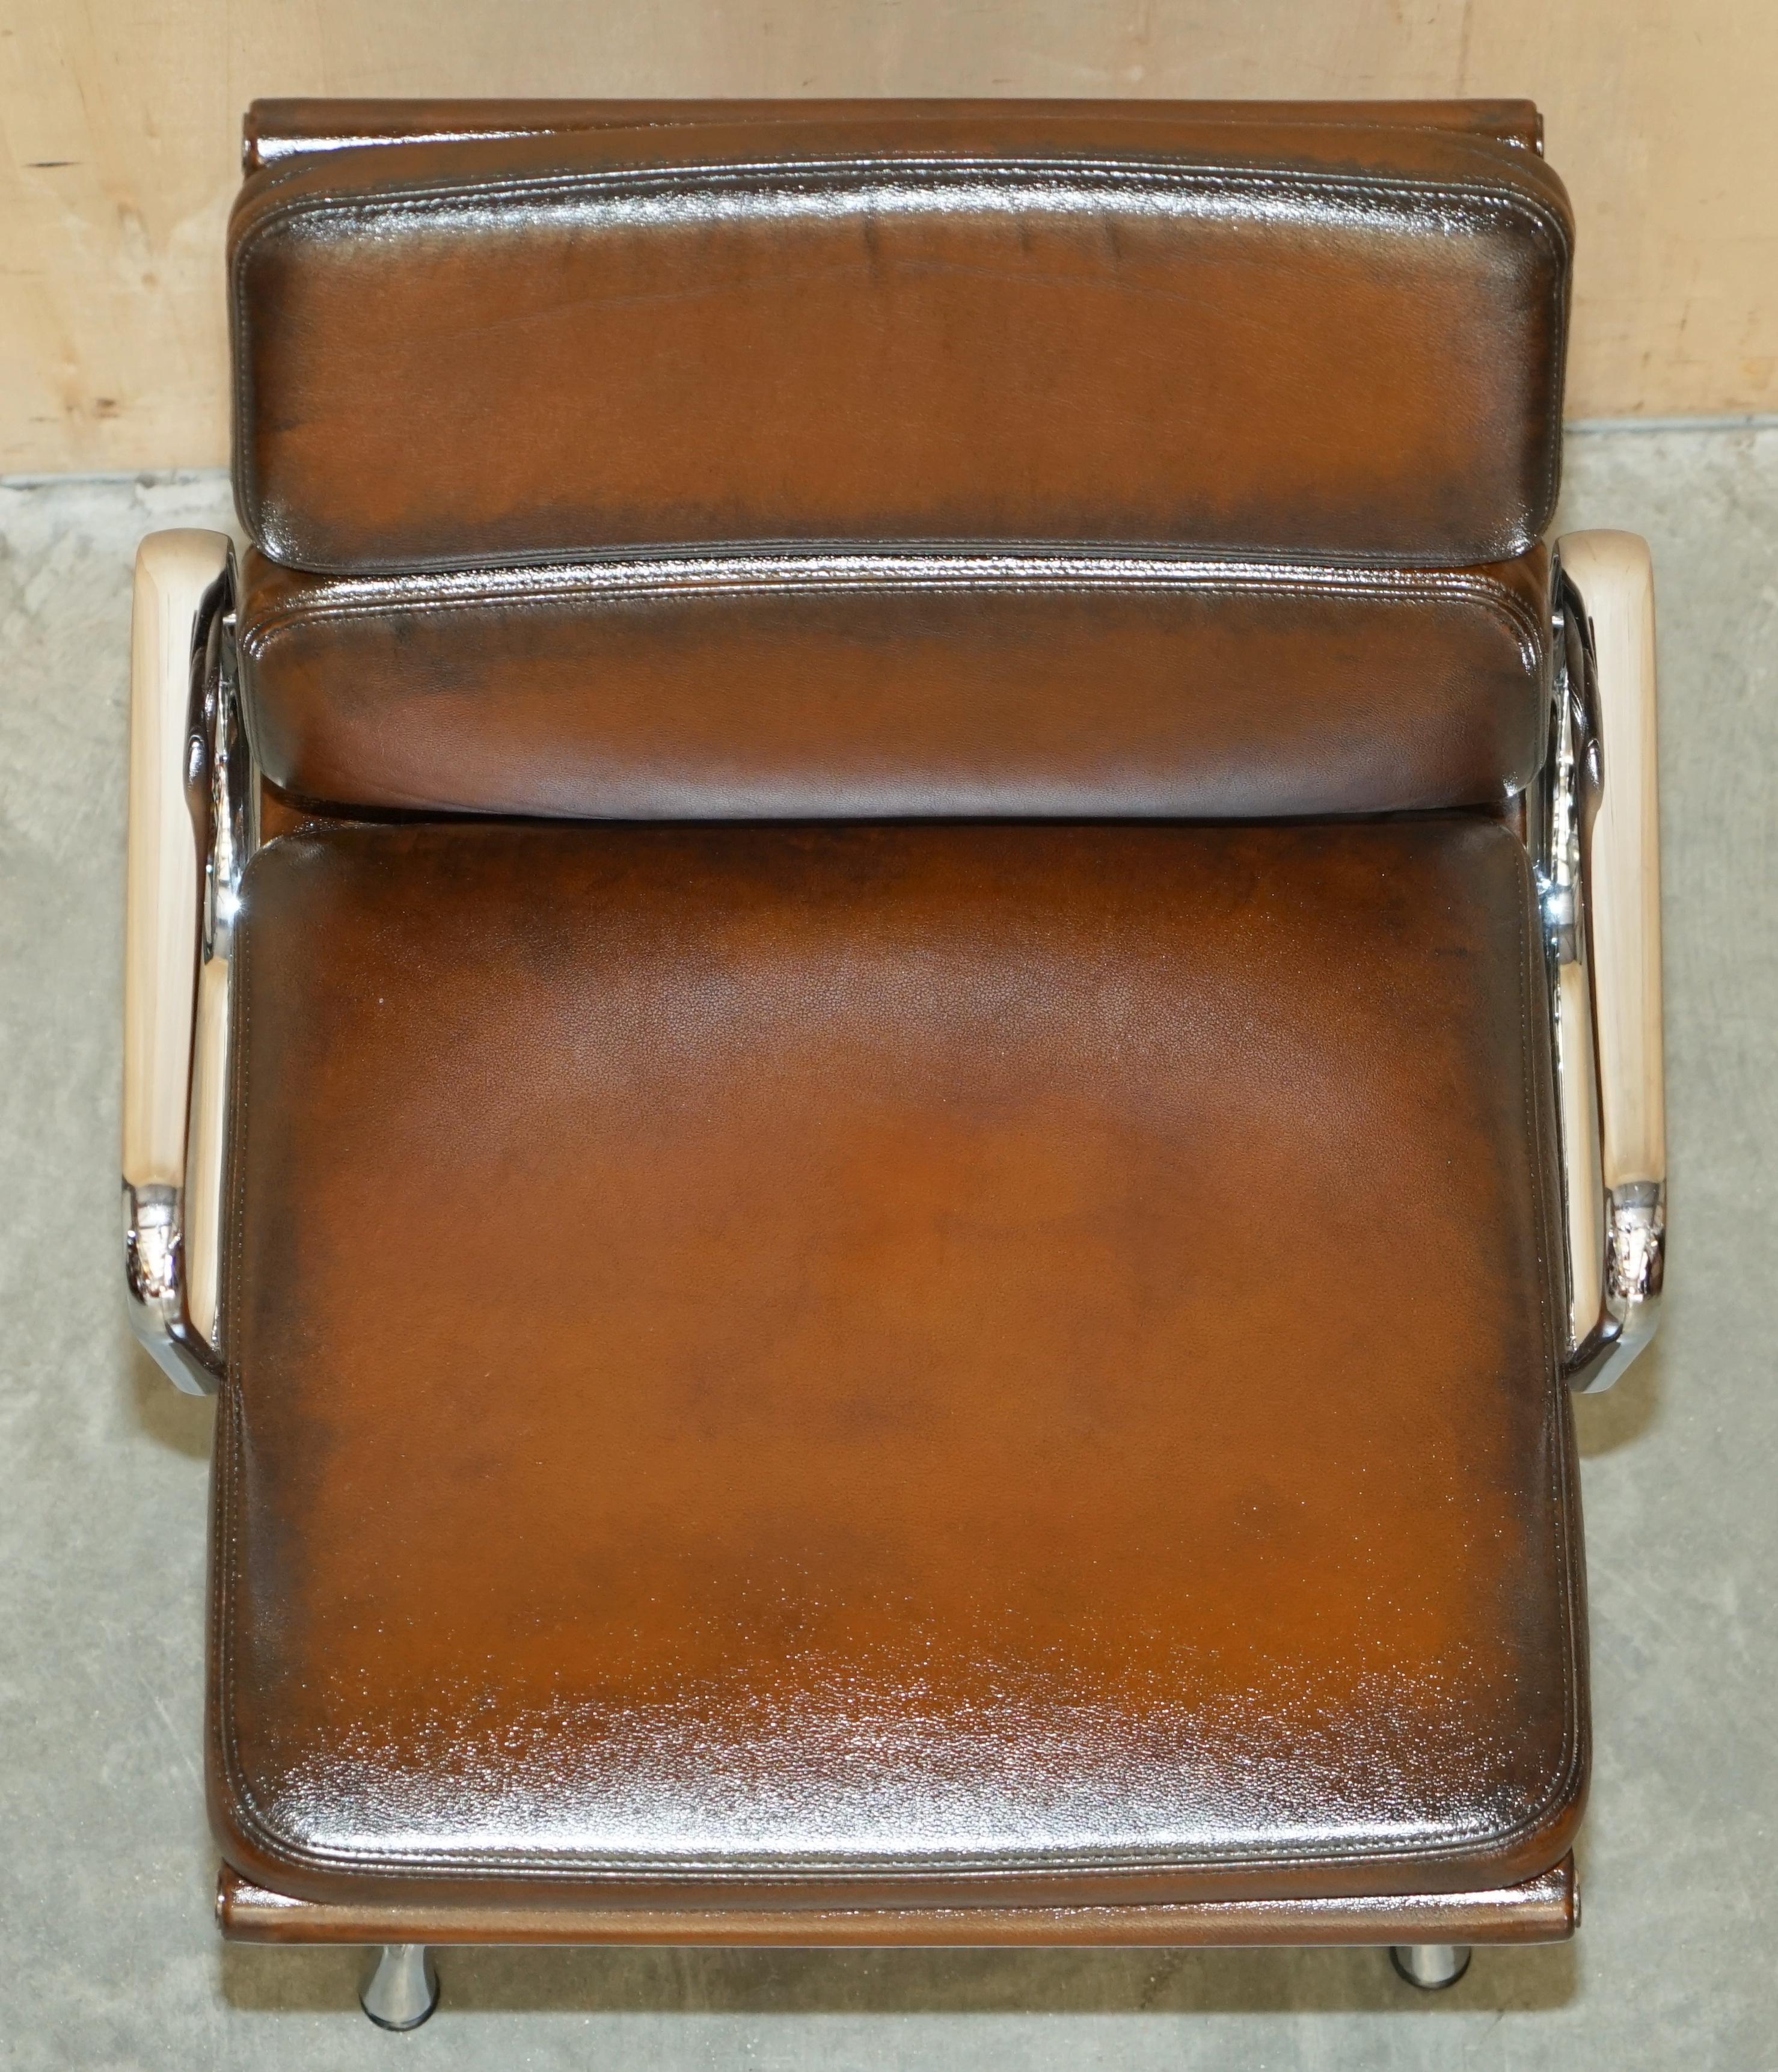 RARE VITRA EAMES EA 208 SOFT PAD SWiVEL BROWN LEATHER OFFICE ARMCHAIR 9